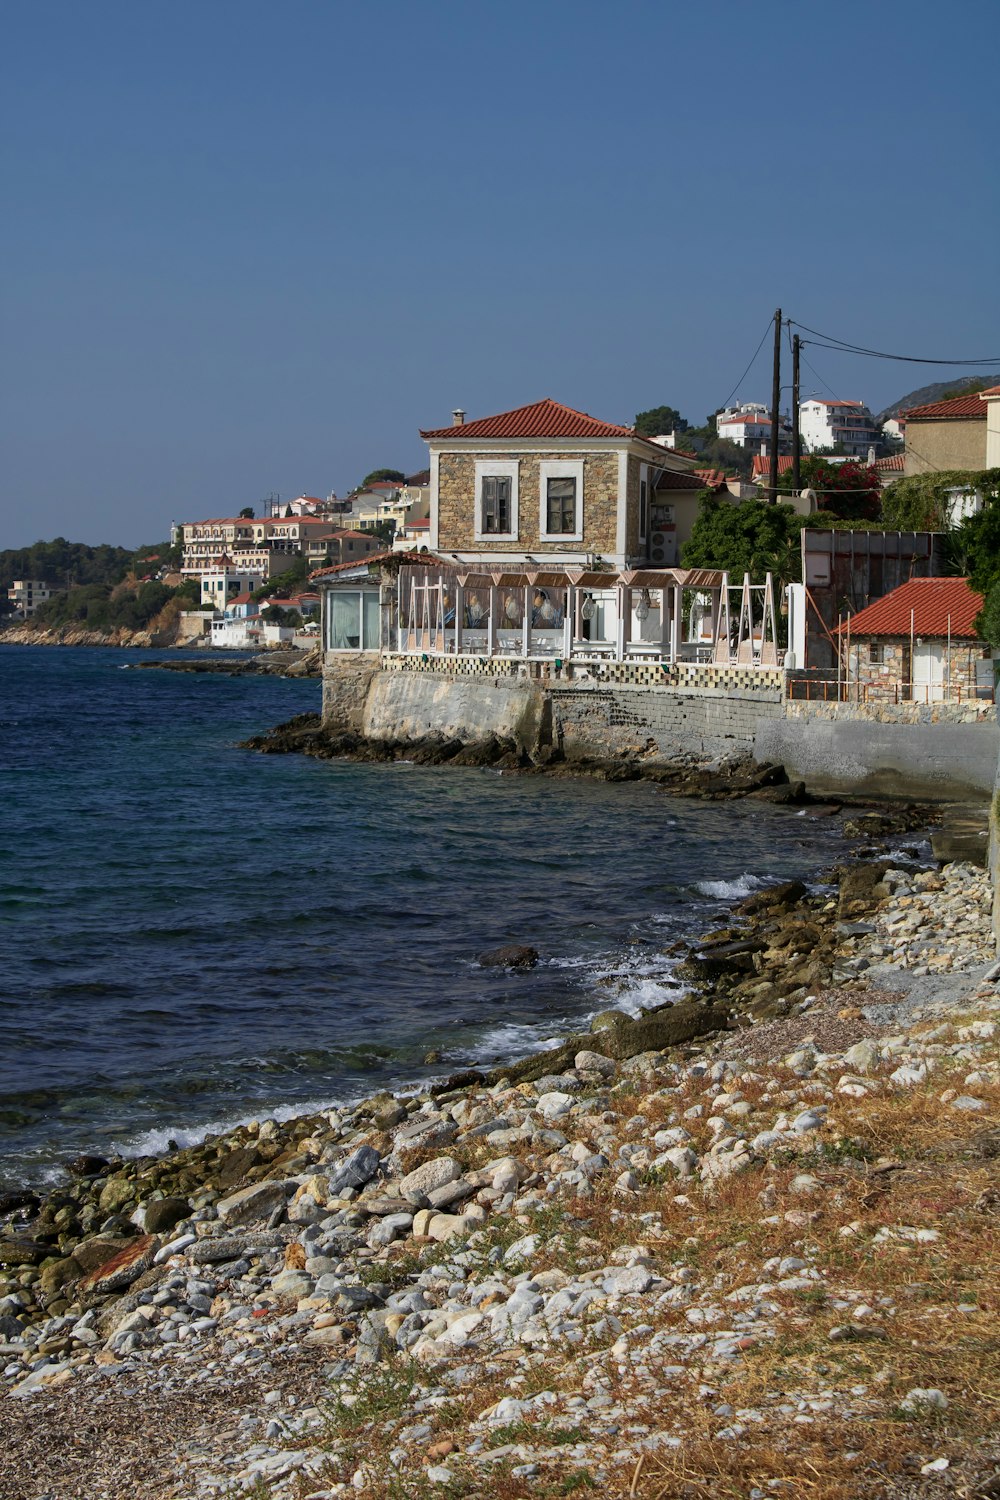 a rocky shore with houses and a body of water